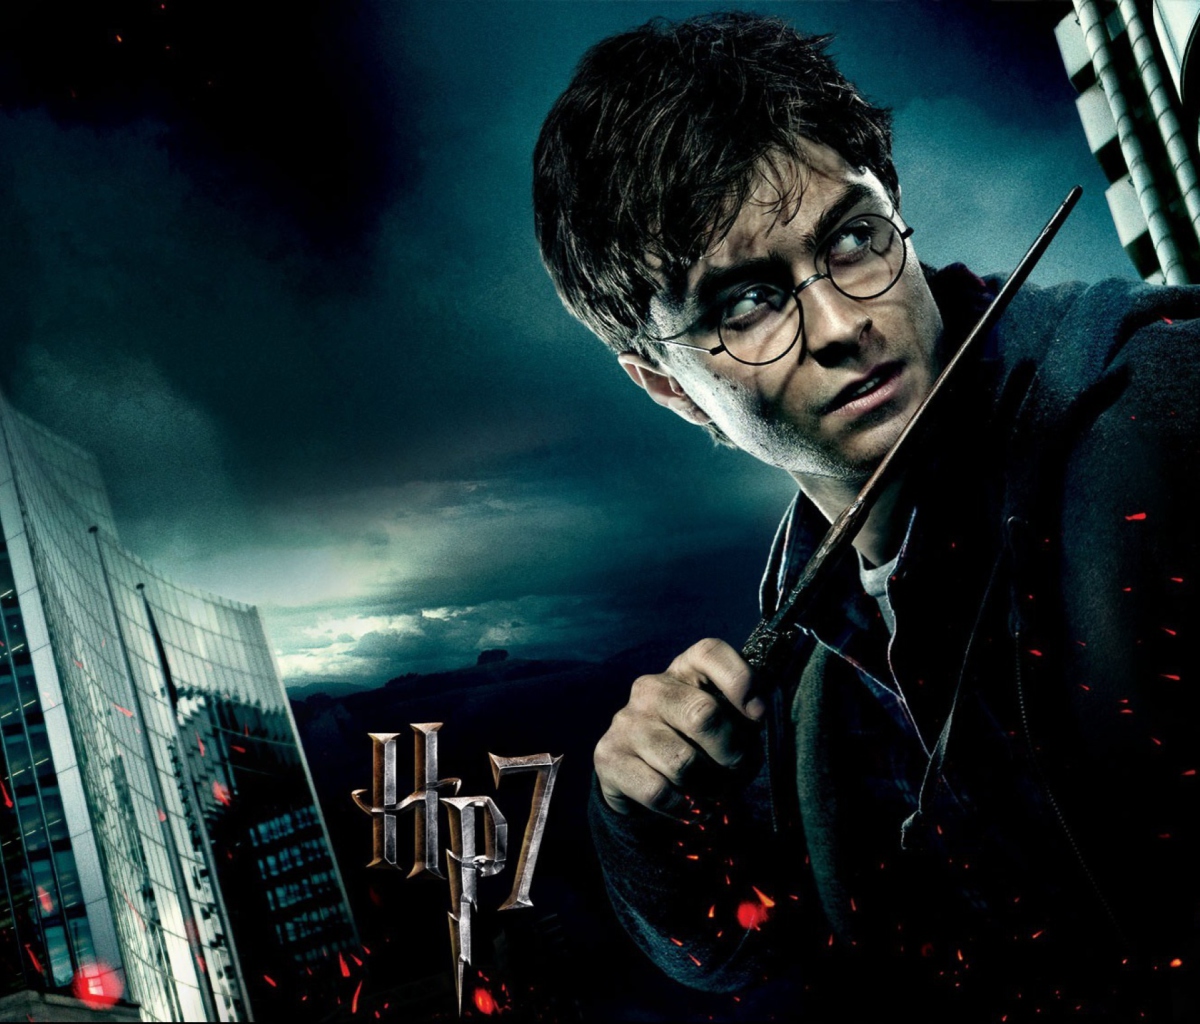 Das Harry Potter And The Deathly Hallows Part-1 Wallpaper 1200x1024